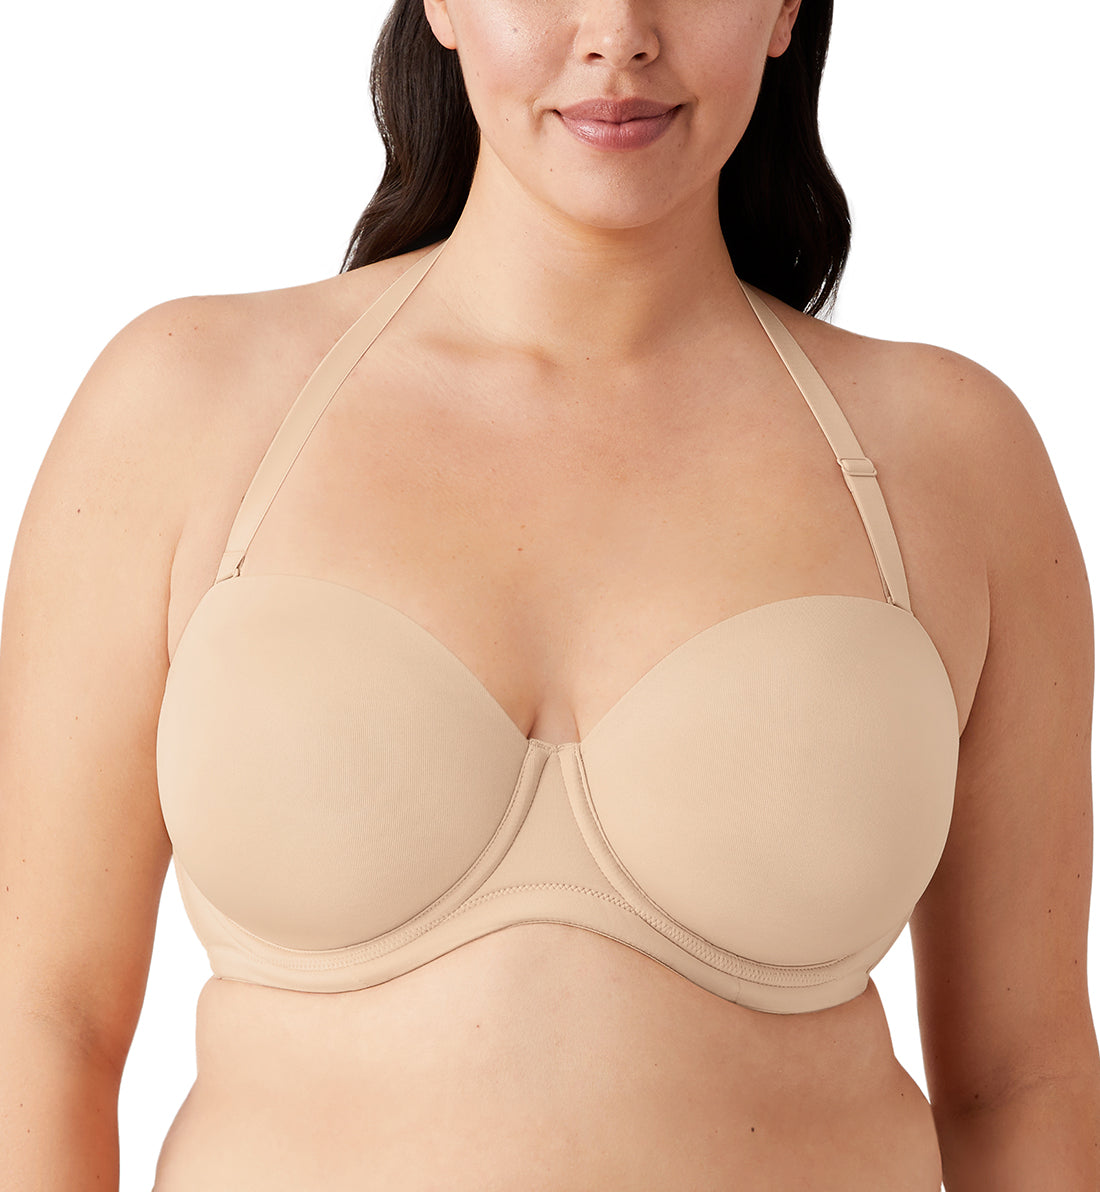 Wacoal Red Carpet Strapless Full Busted Underwire Bra (854119),30D,Natural Nude - Natural Nude,30D